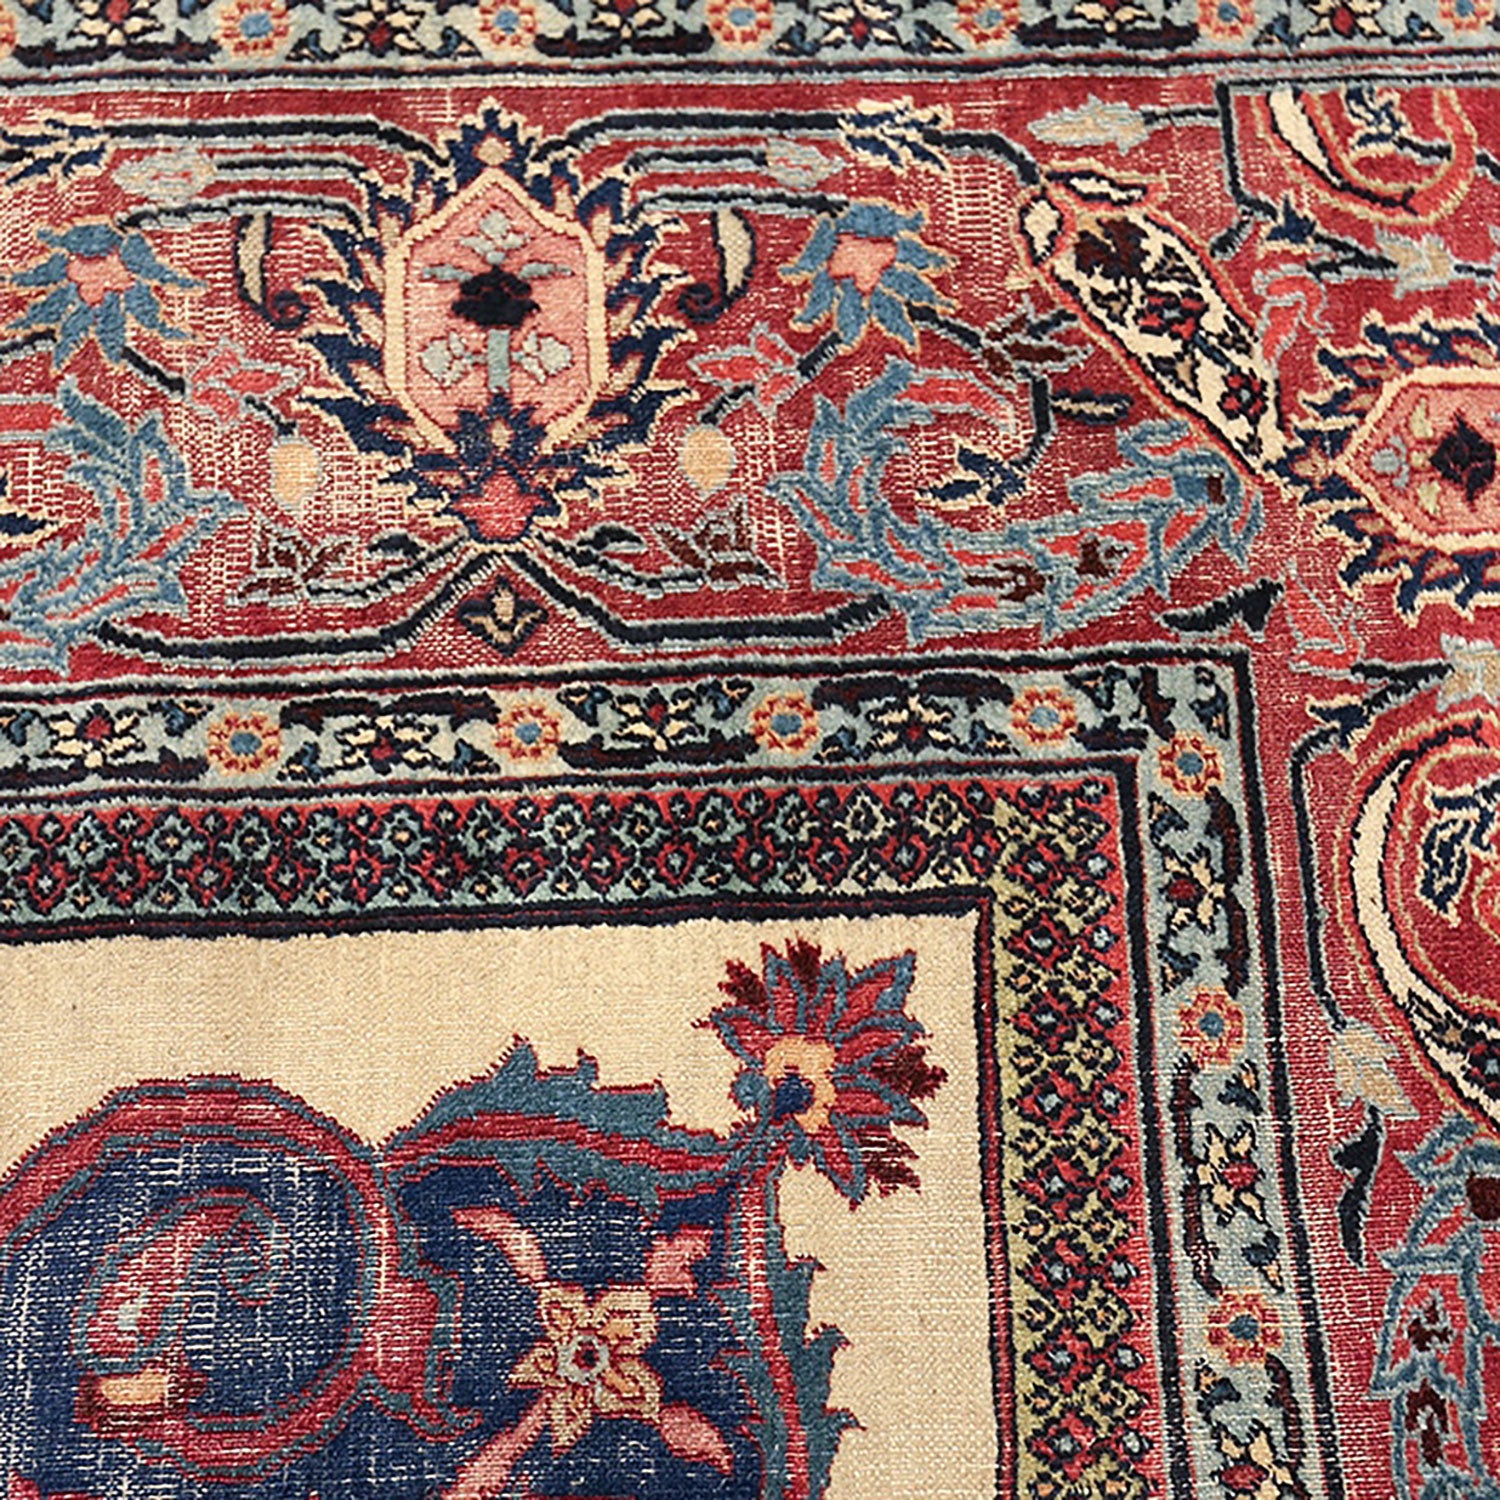 Intricately woven Persian/Oriental rug featuring elaborate patterns and vibrant colors.